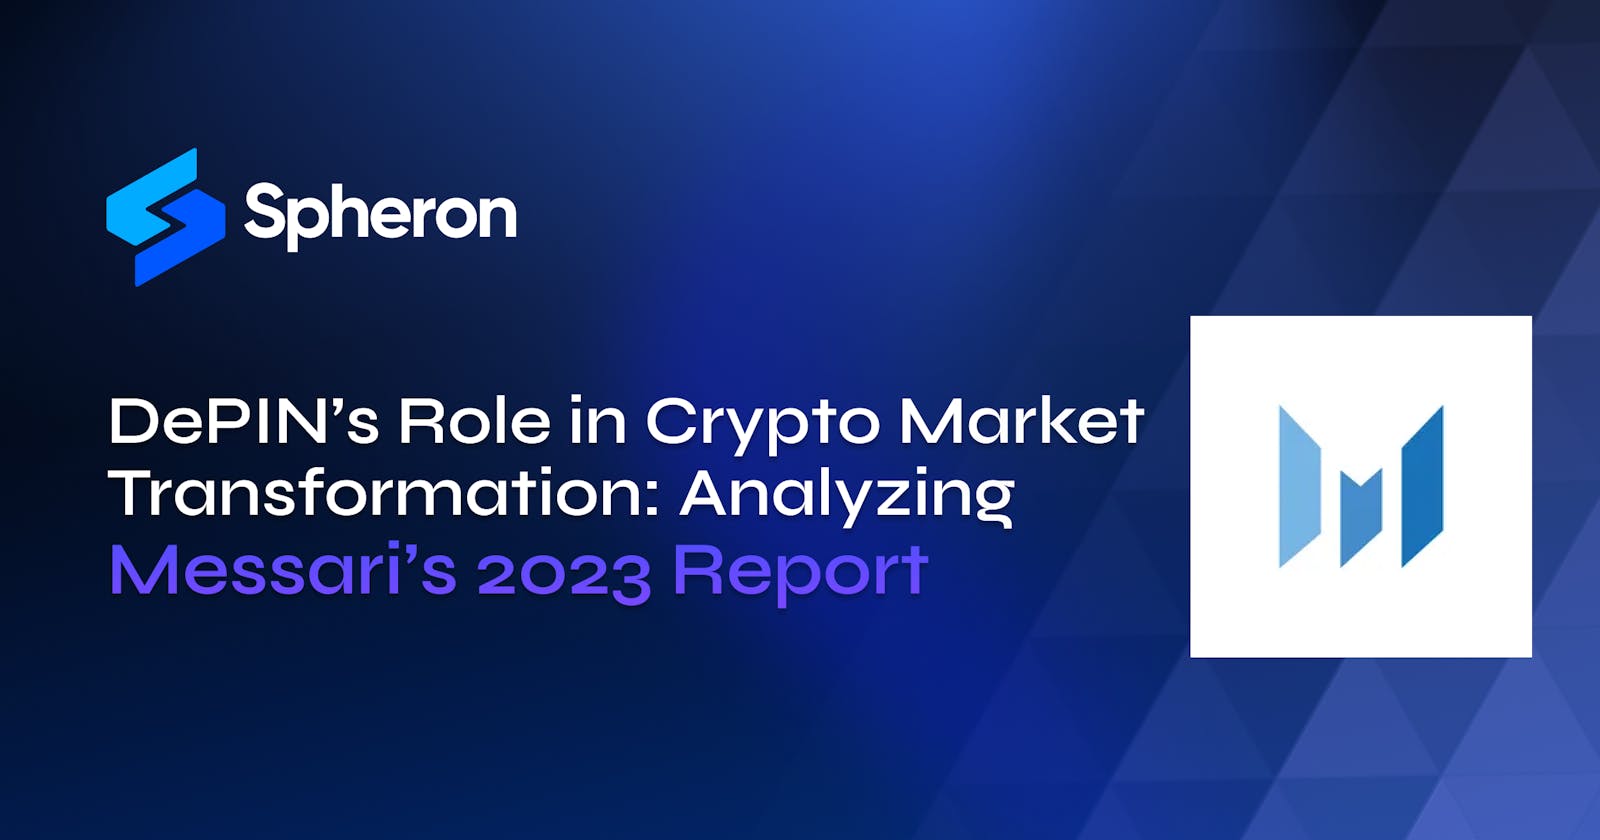 DePIN’s Role in Crypto Market Transformation: Analyzing Messari’s 2023 Report